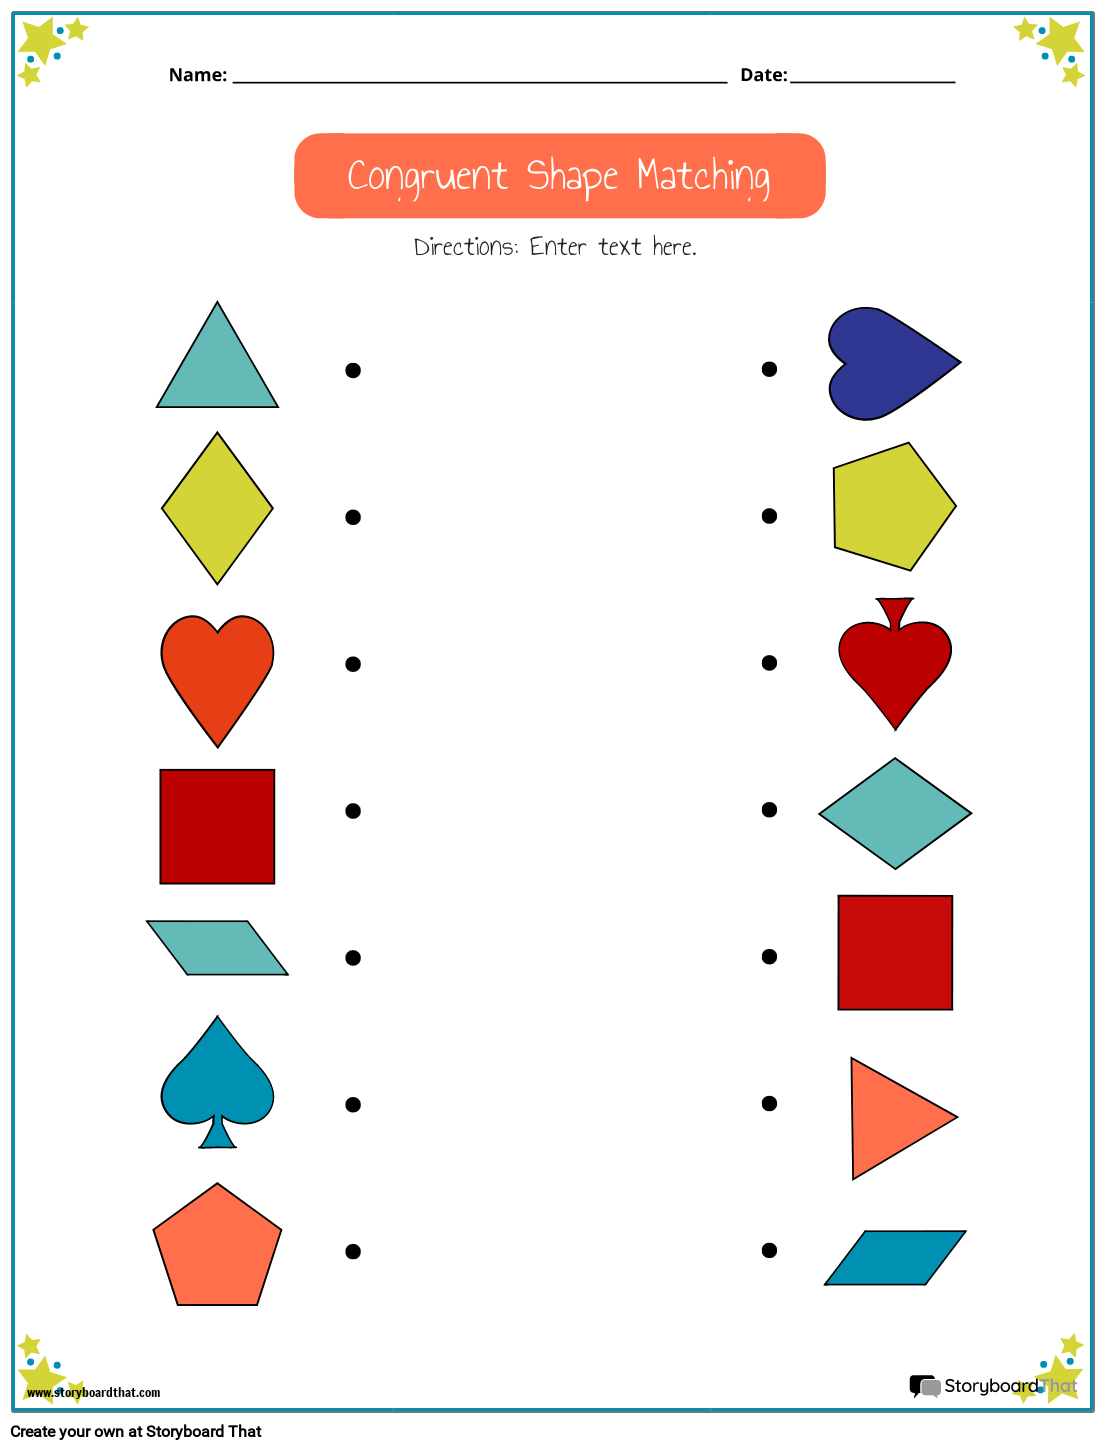 Matching Congruent Shapes Worksheet with Star Border